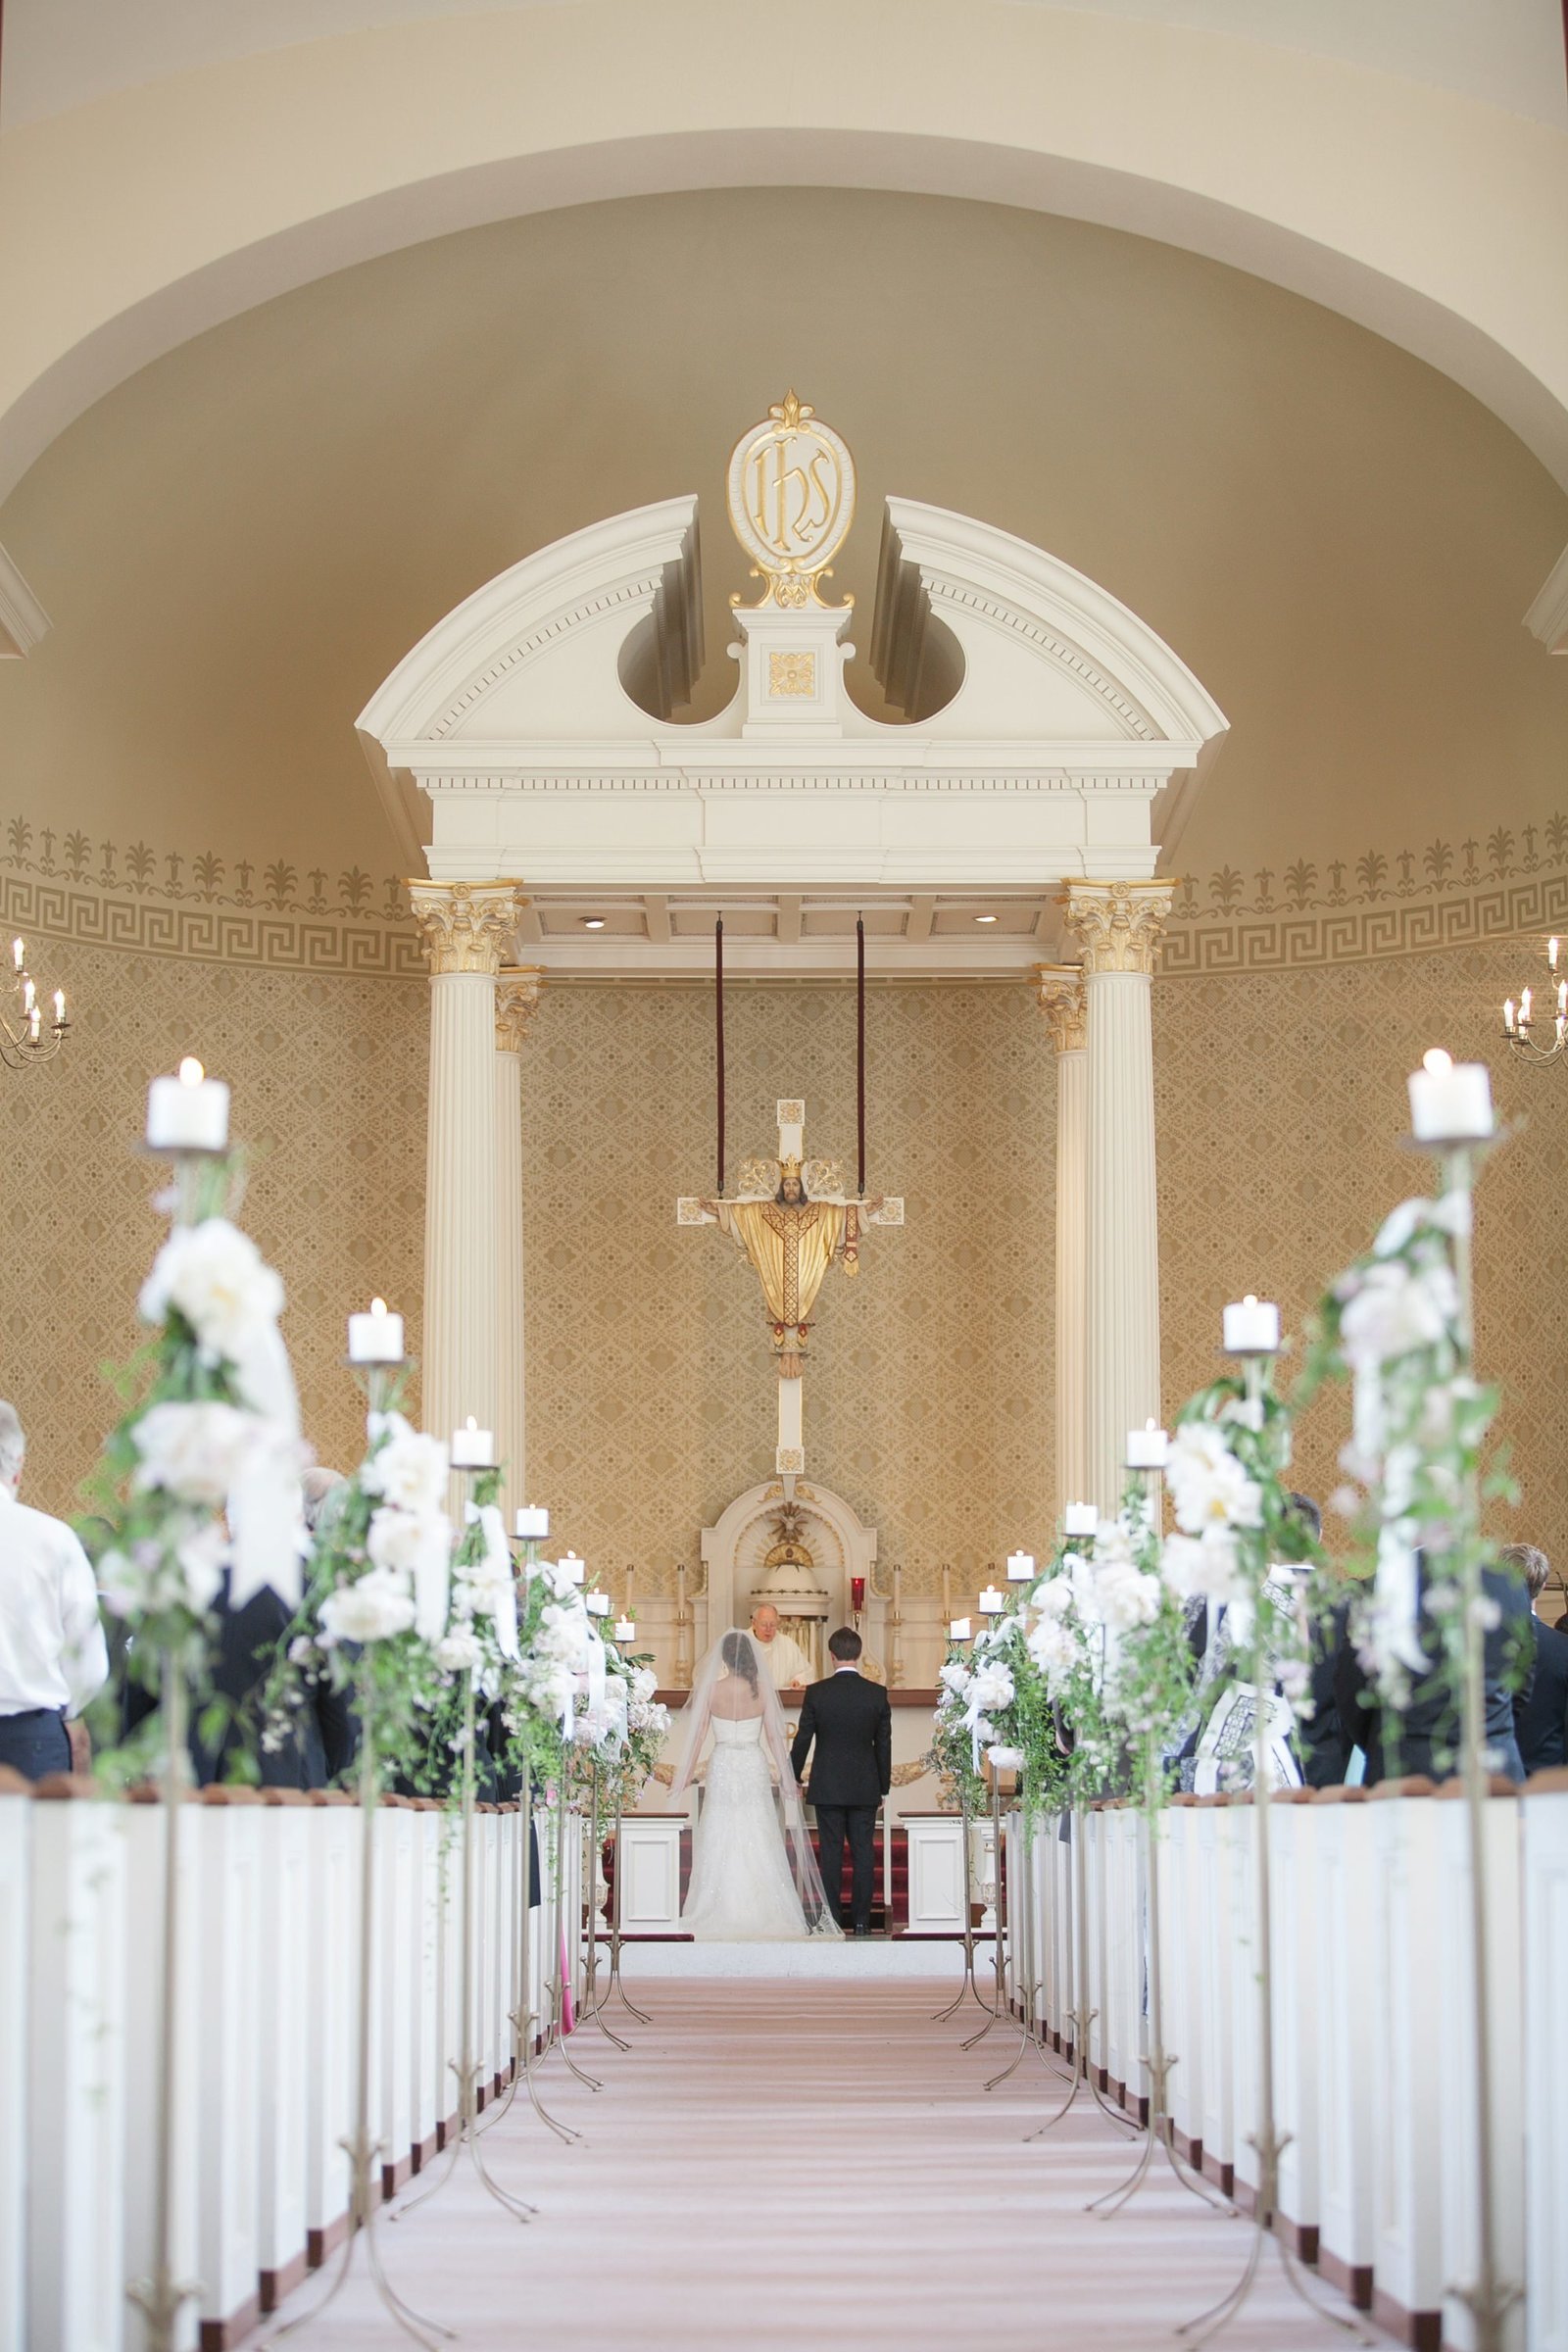 Gatsby themed wedding at The Branford House in Groton, CT